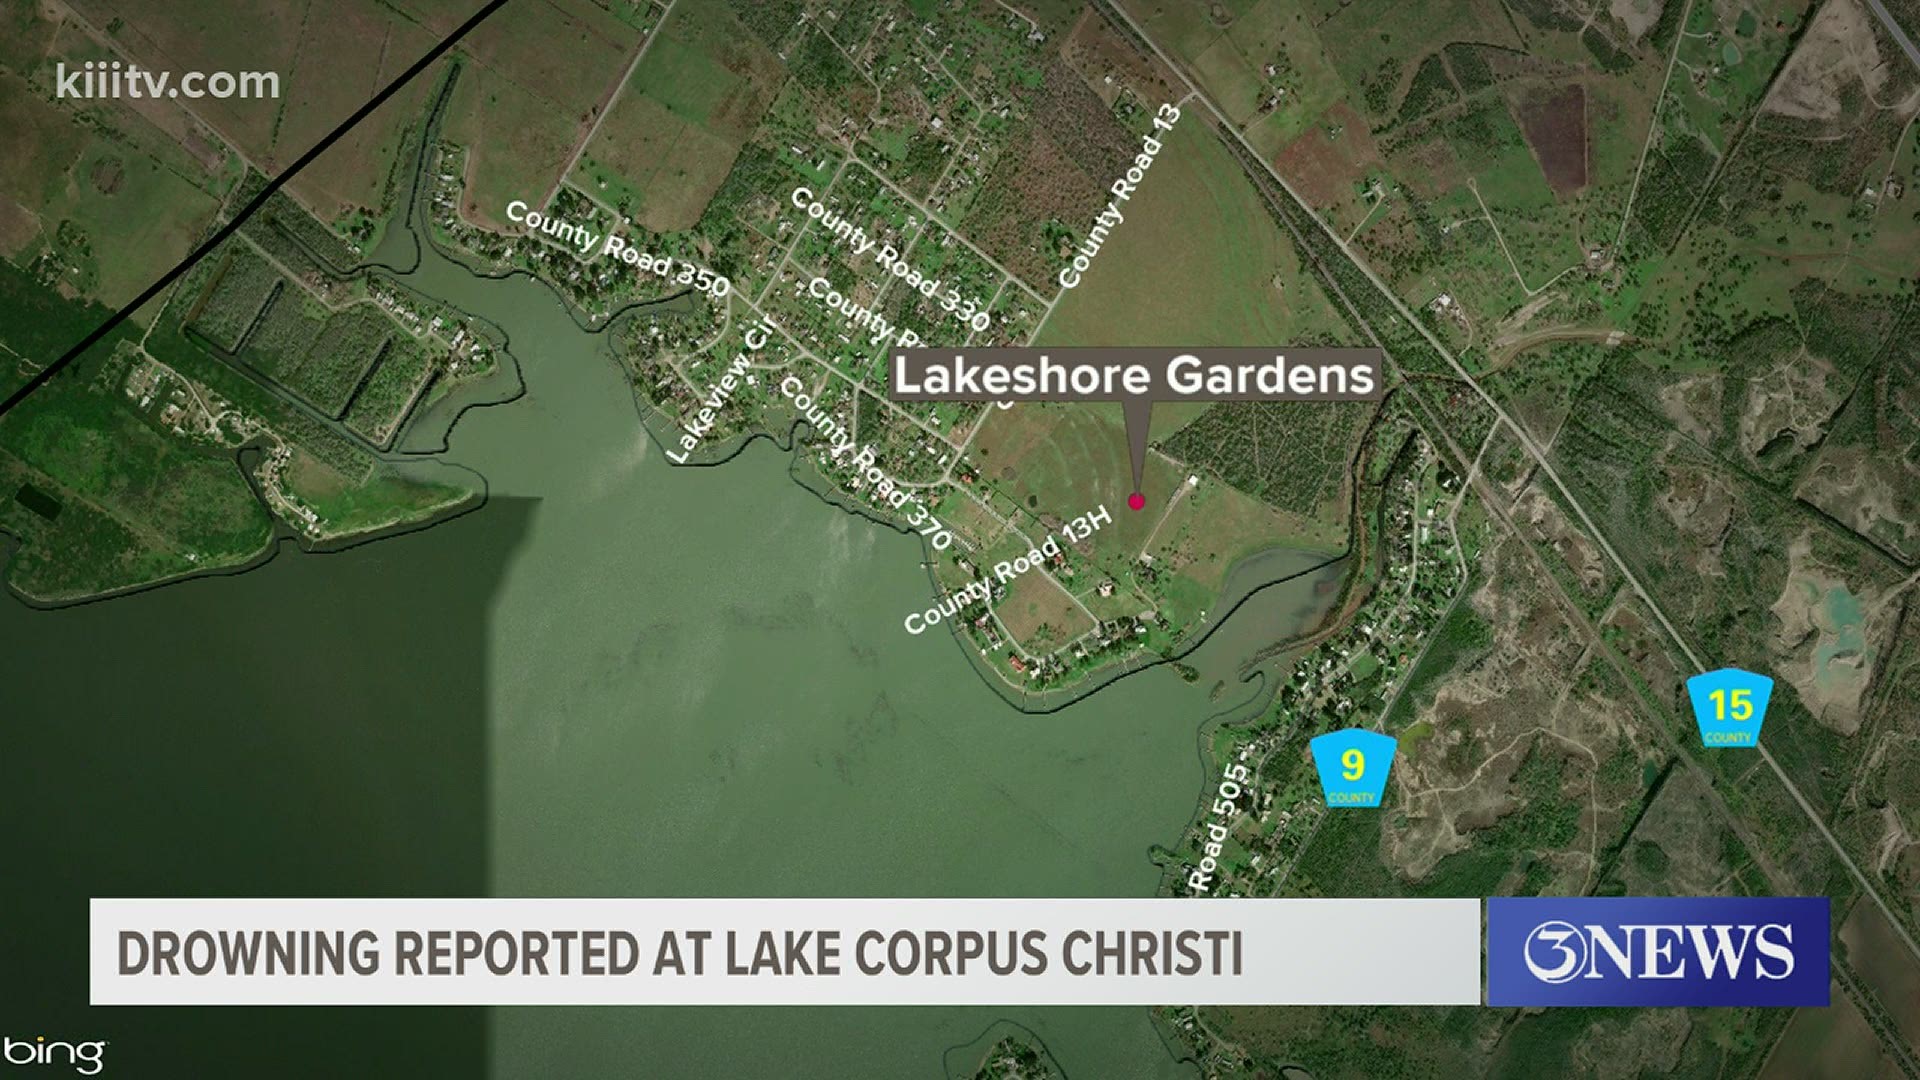 On November 19, a man from Oklahoma went fishing in Lake Corpus Christi and never returned.